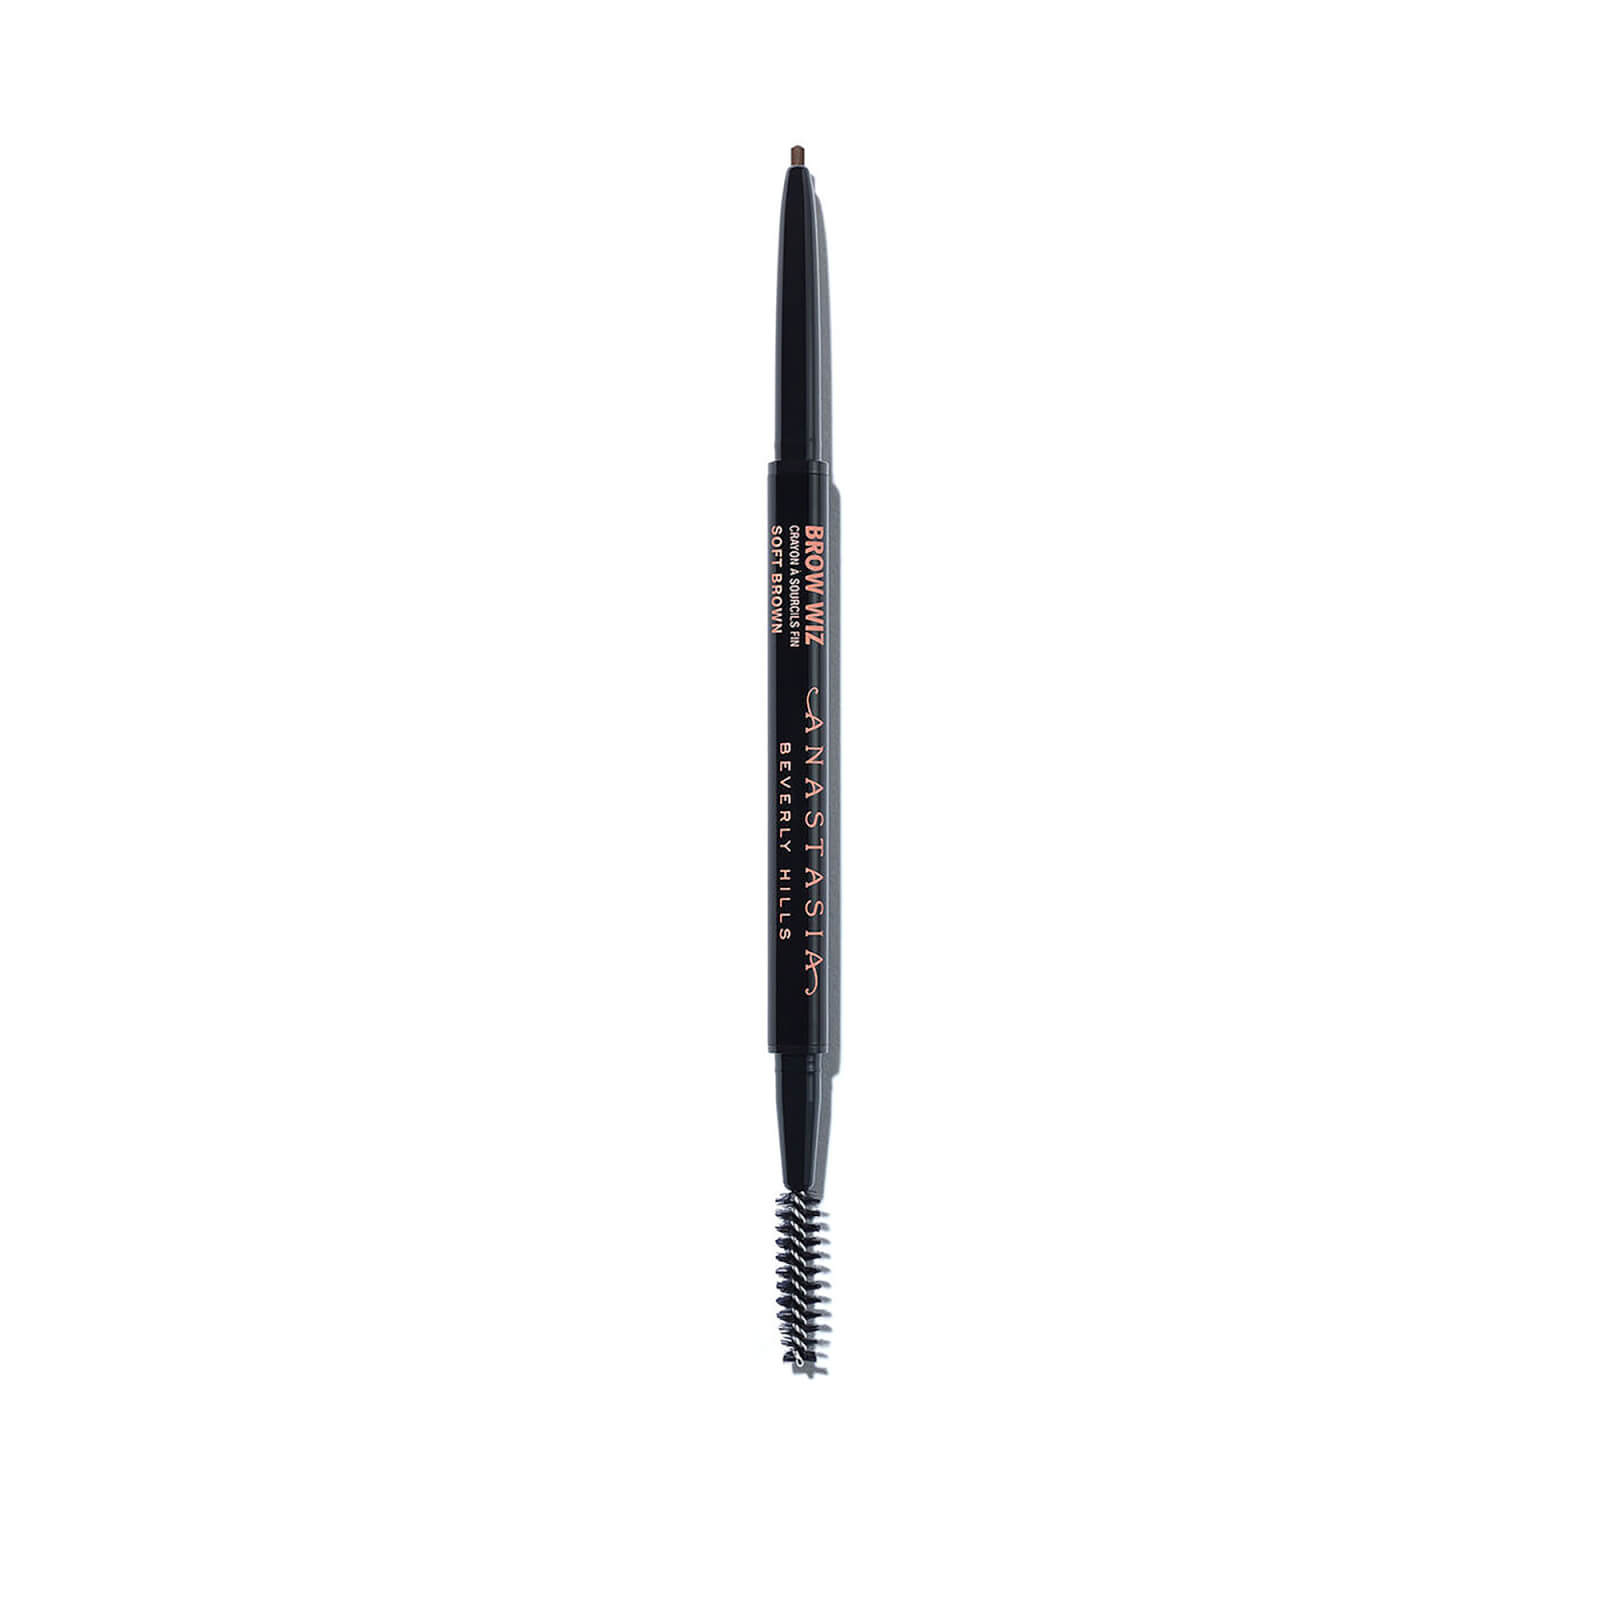 Image of Anastasia Beverly Hills Brow Wiz 0.08g (Various Shades) - Soft Brown